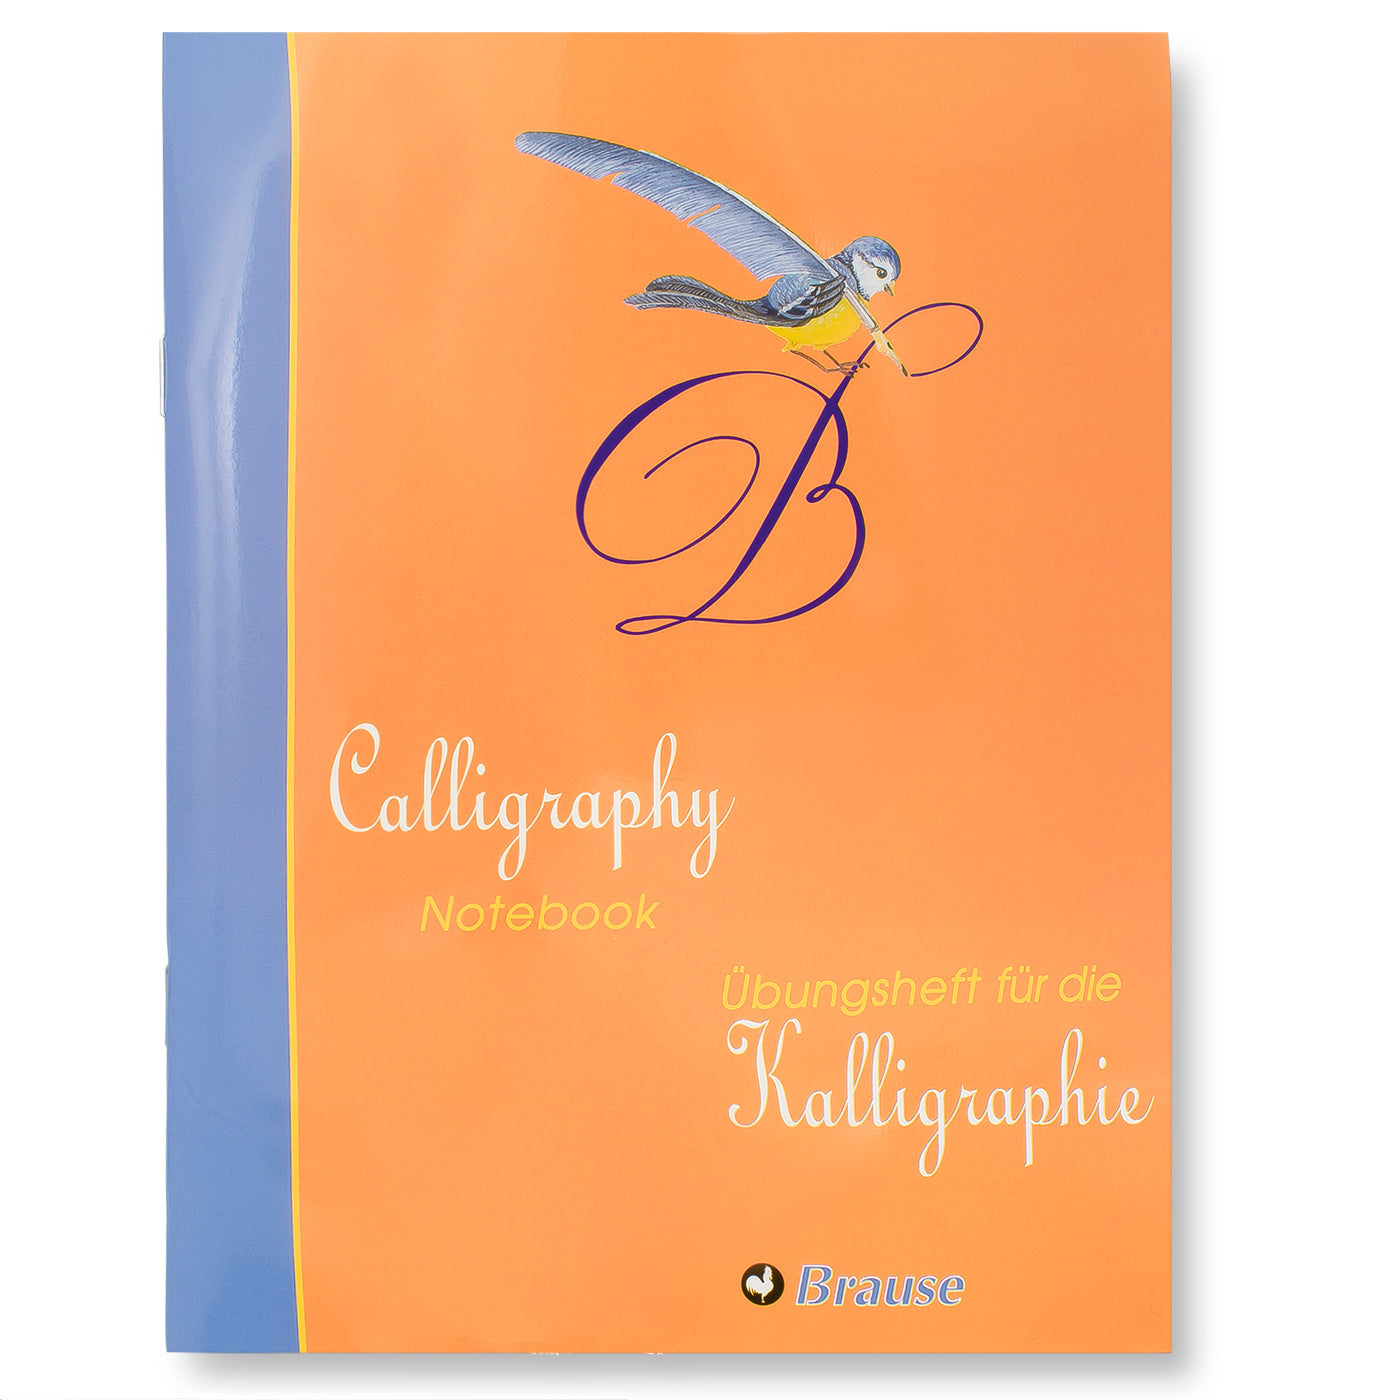 Brause Paper is quality paper for calligraphy 